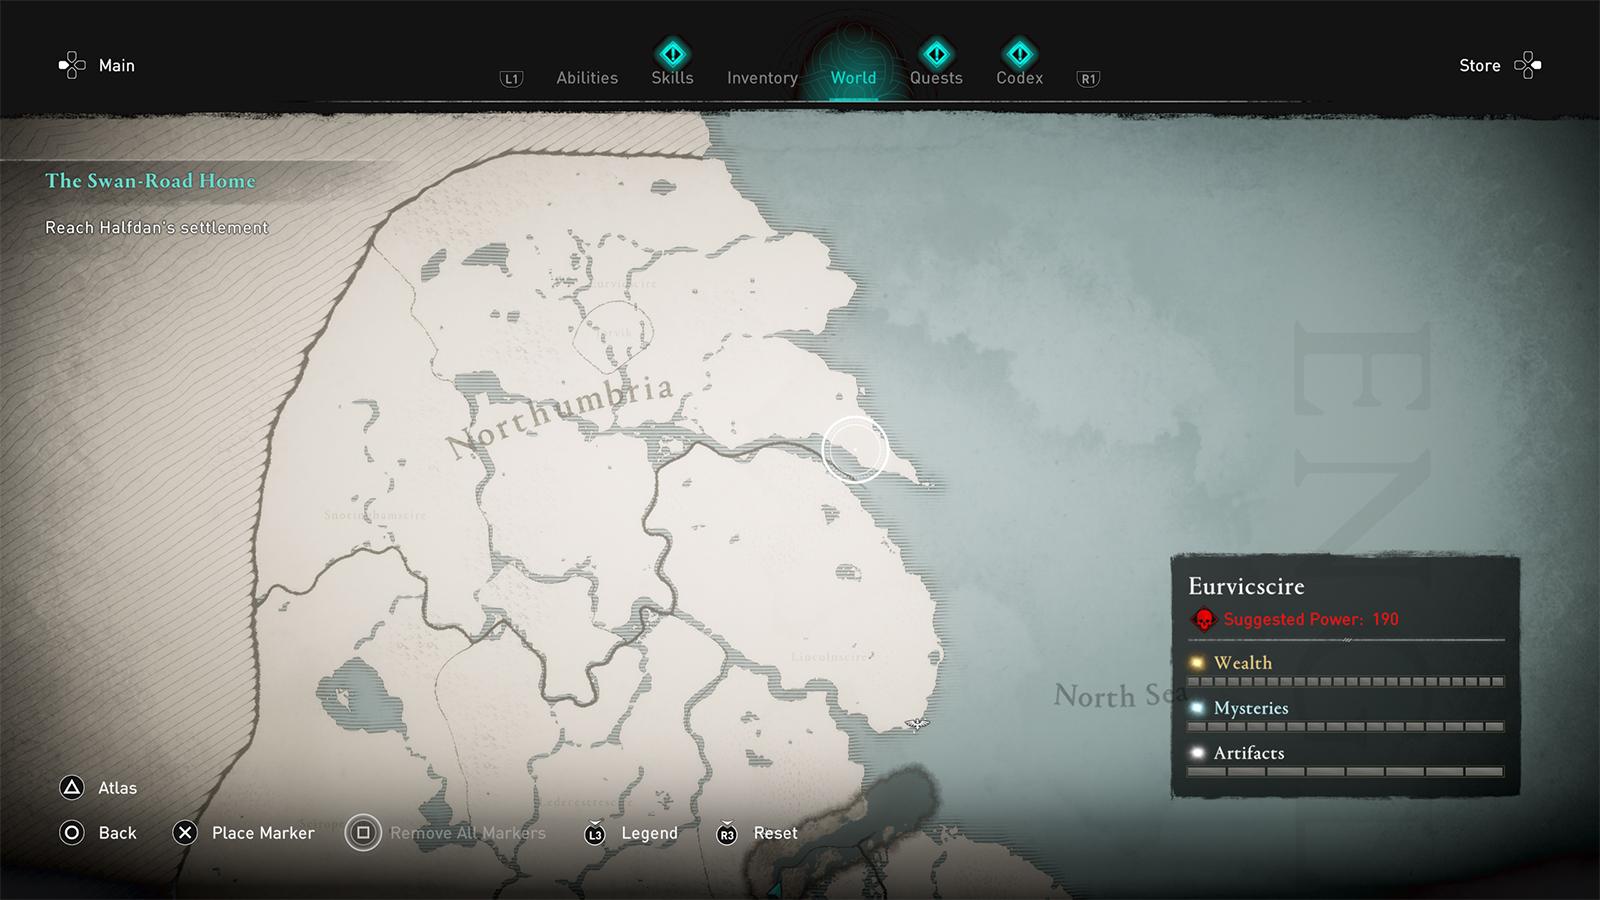 Assassin's Creed Valhalla - Full Map of England ALL LOCATIONS (All  Abilities, Armors, and More) 